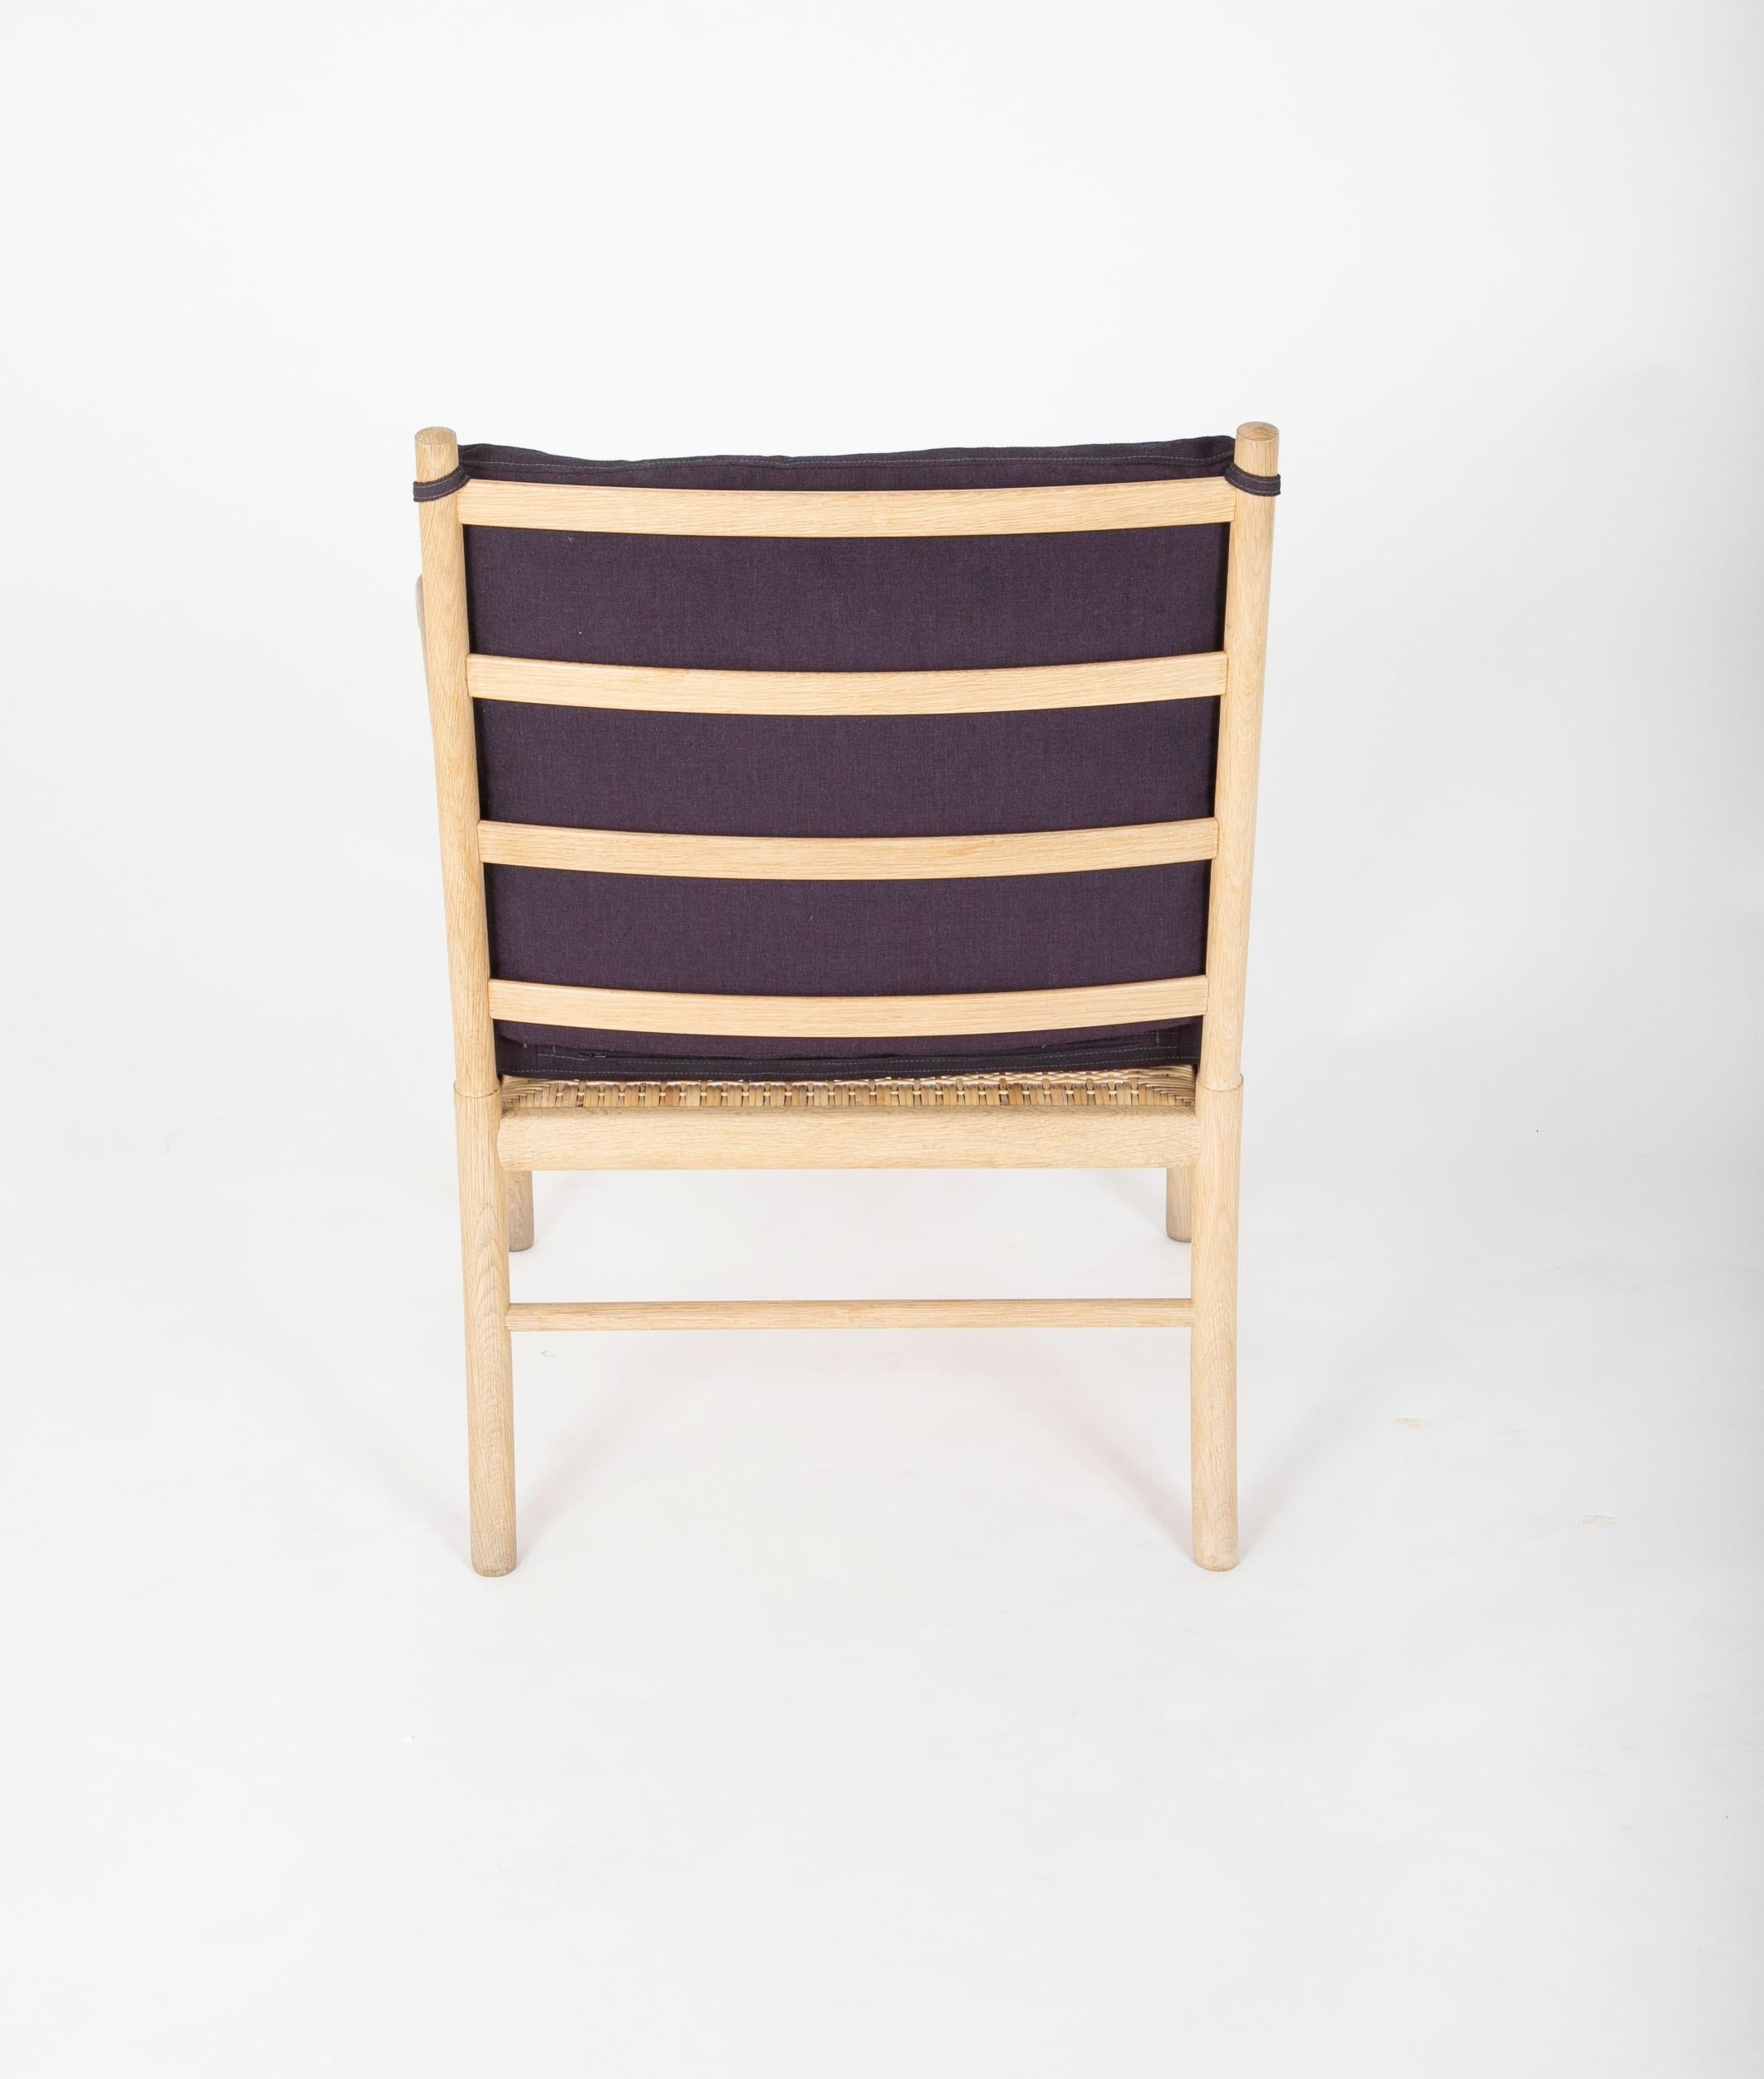 Ole Wanscher 'Colonial Chair' 'OW 149' for Carl Hansen & Sons 1